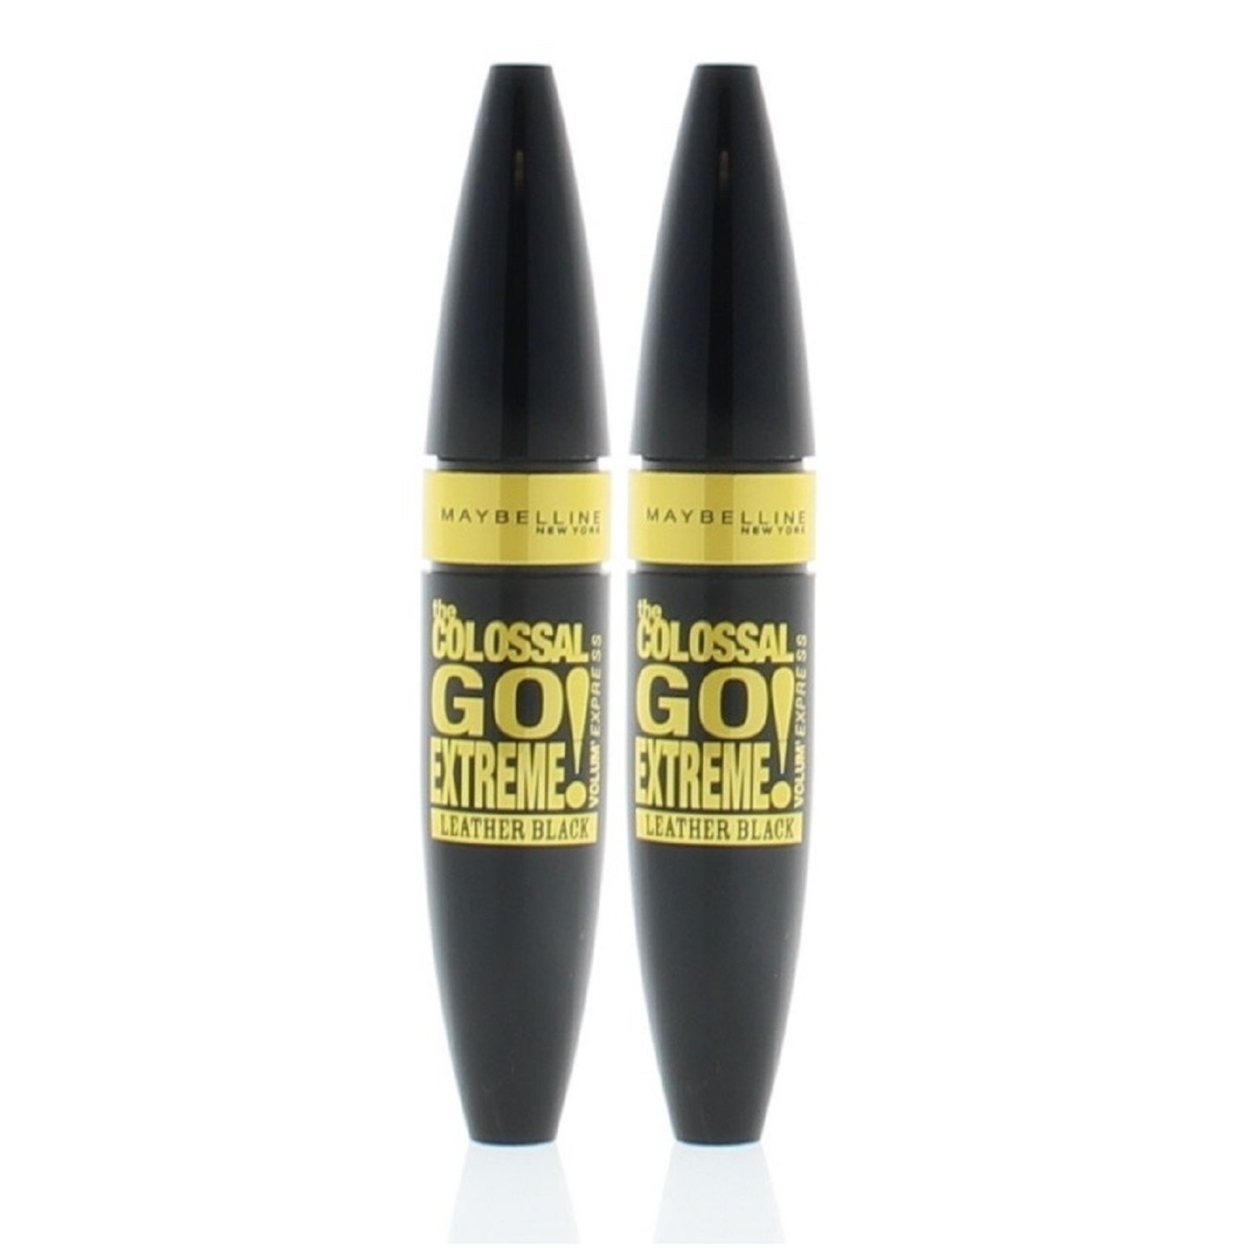 Maybelline Volum'Express The Colossal Go Extreme! Mascara Leather Black 9.5ml (2 Pack)